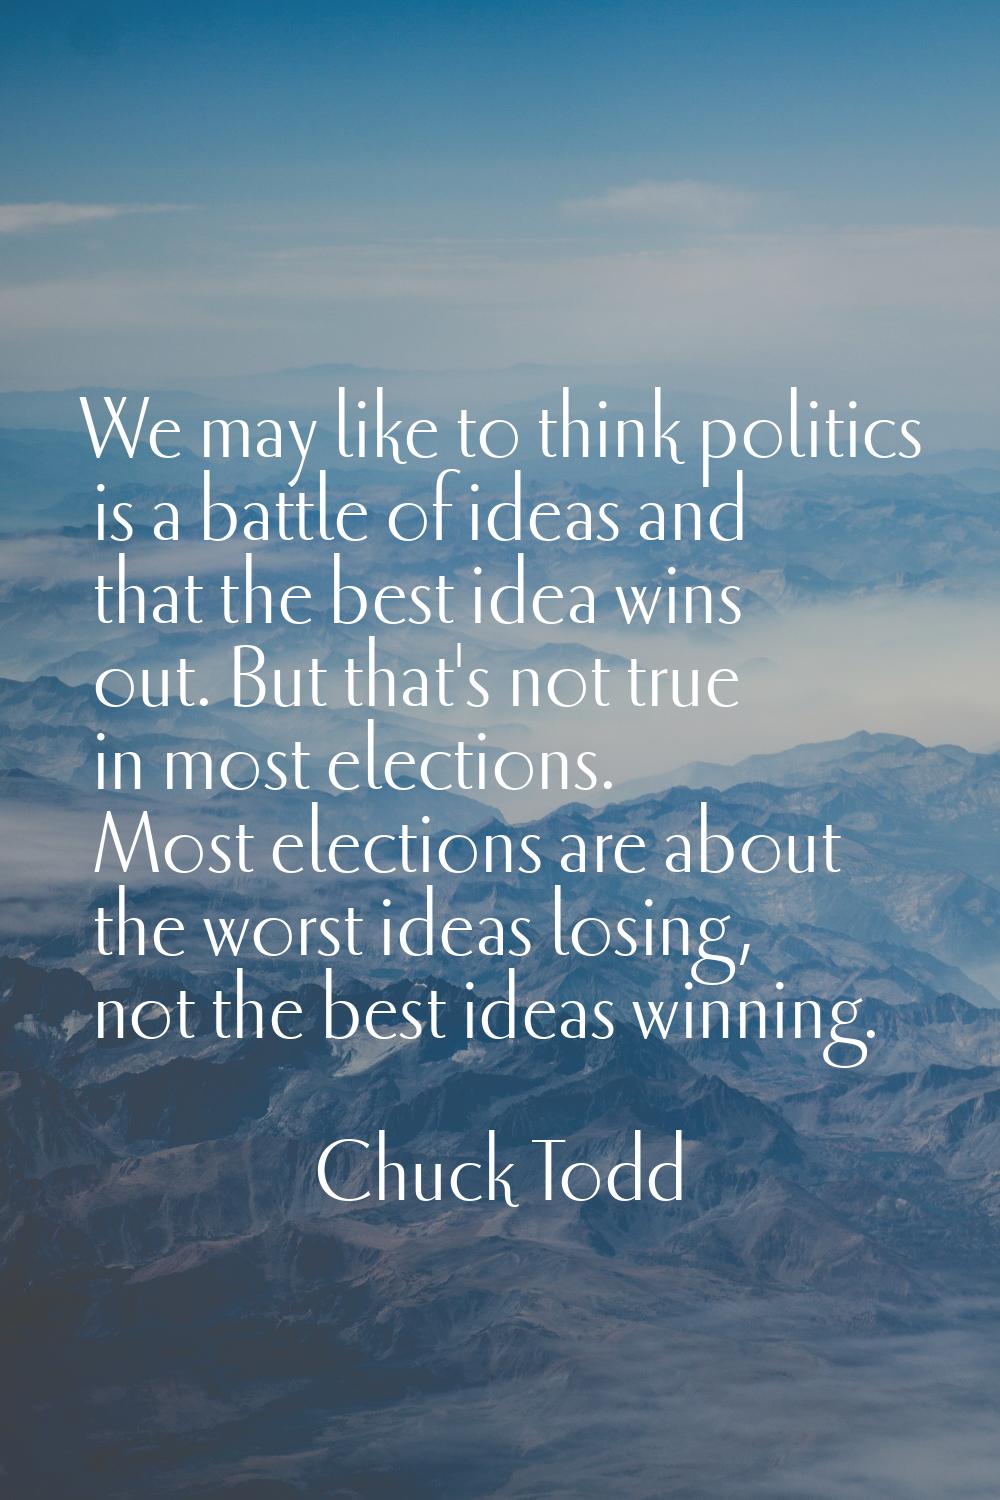 We may like to think politics is a battle of ideas and that the best idea wins out. But that's not 